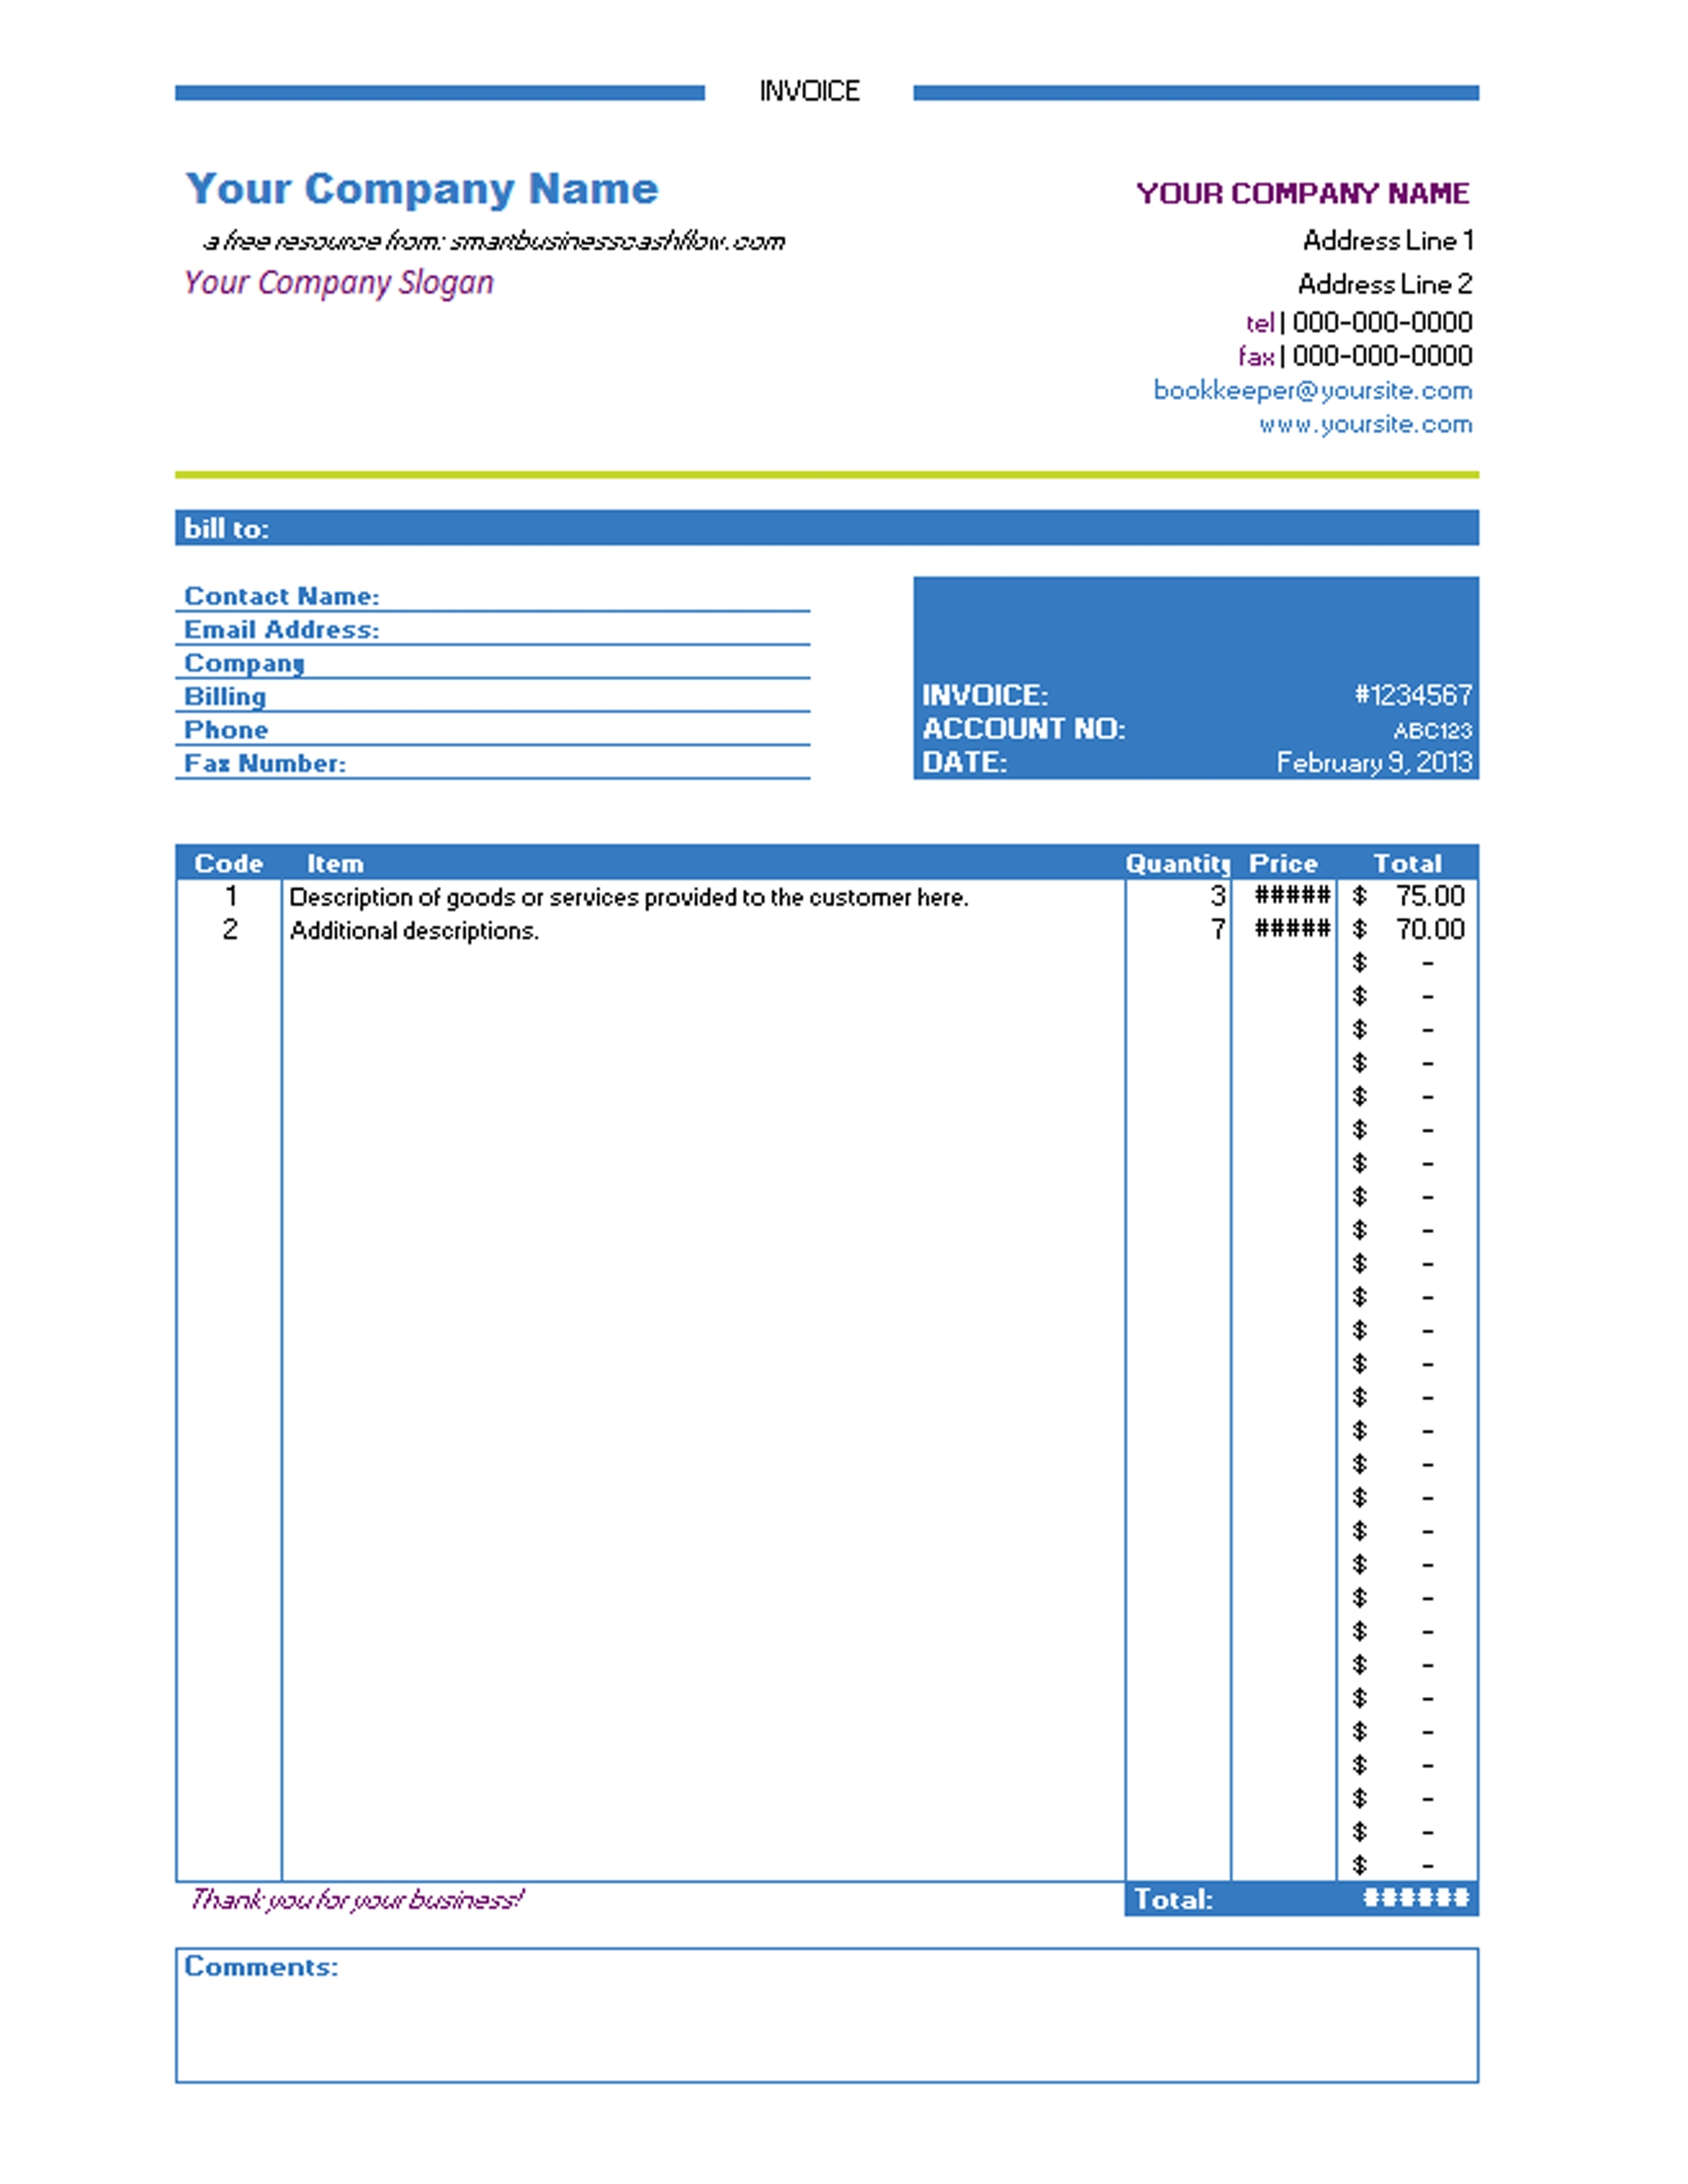 excel invoice sample excel sample invoice invoice template free 2016 2550 X 3300